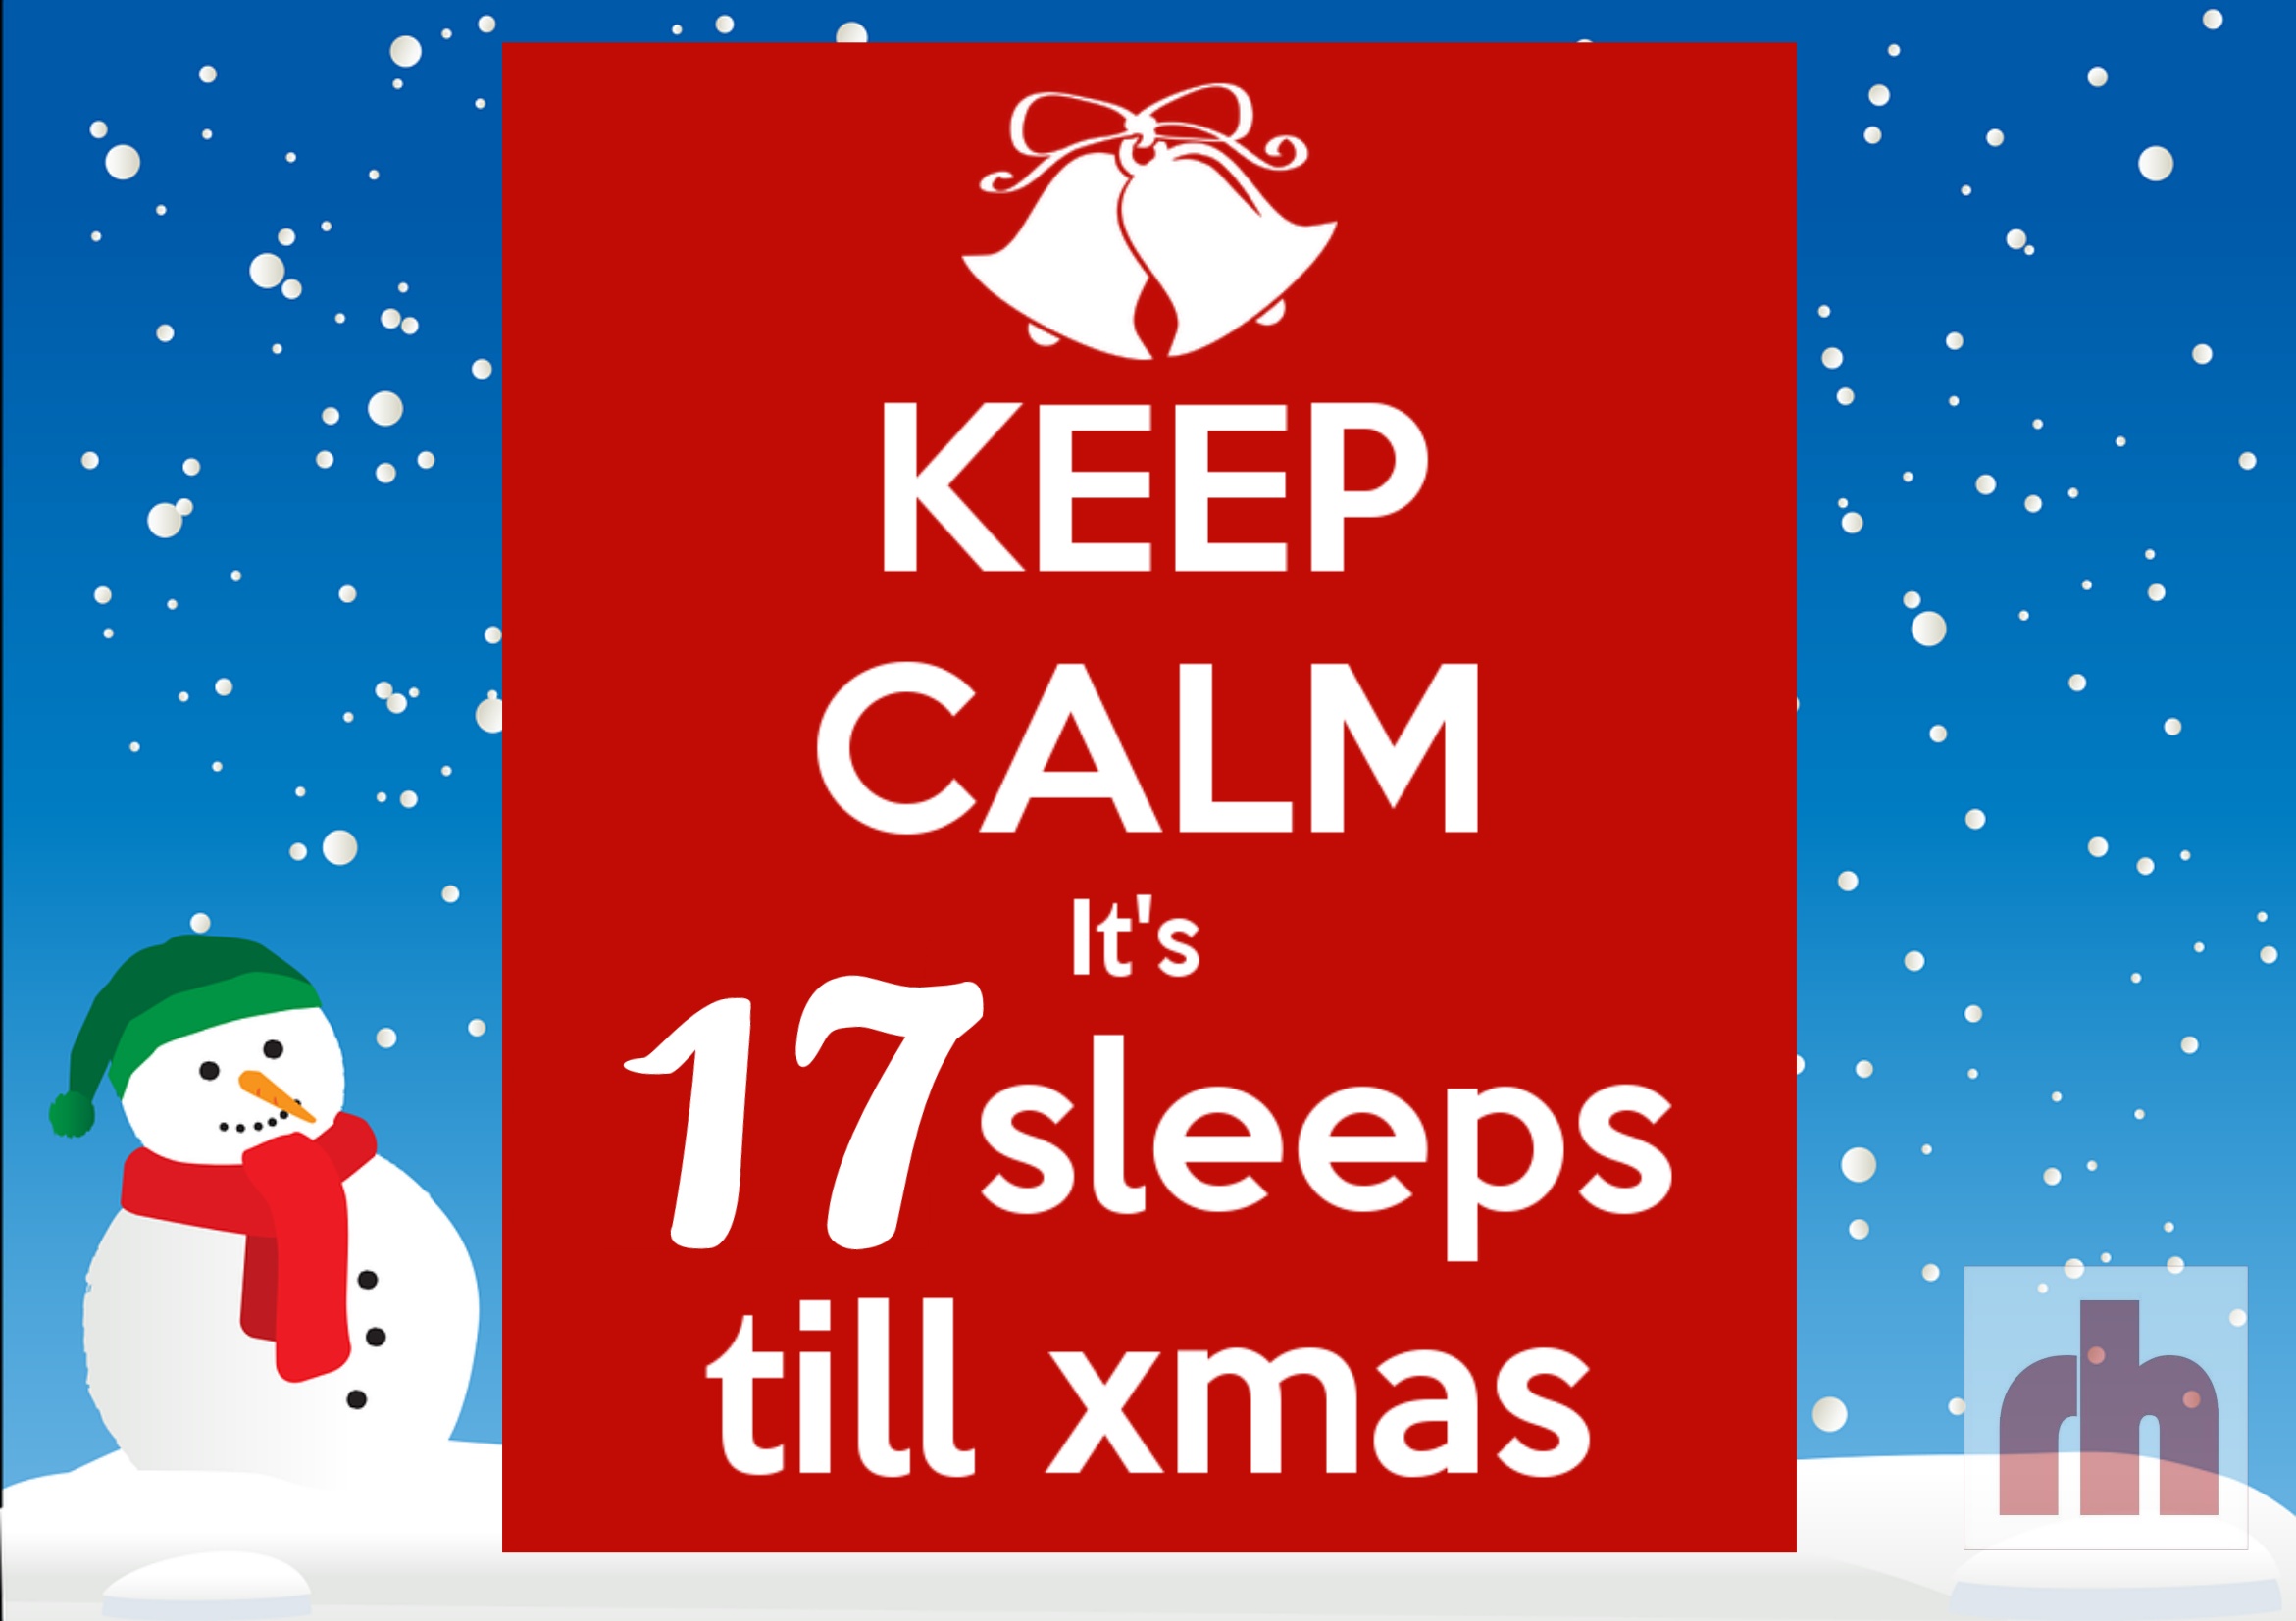 Only 17 more sleeps until numpties stop saying how many sleeps until